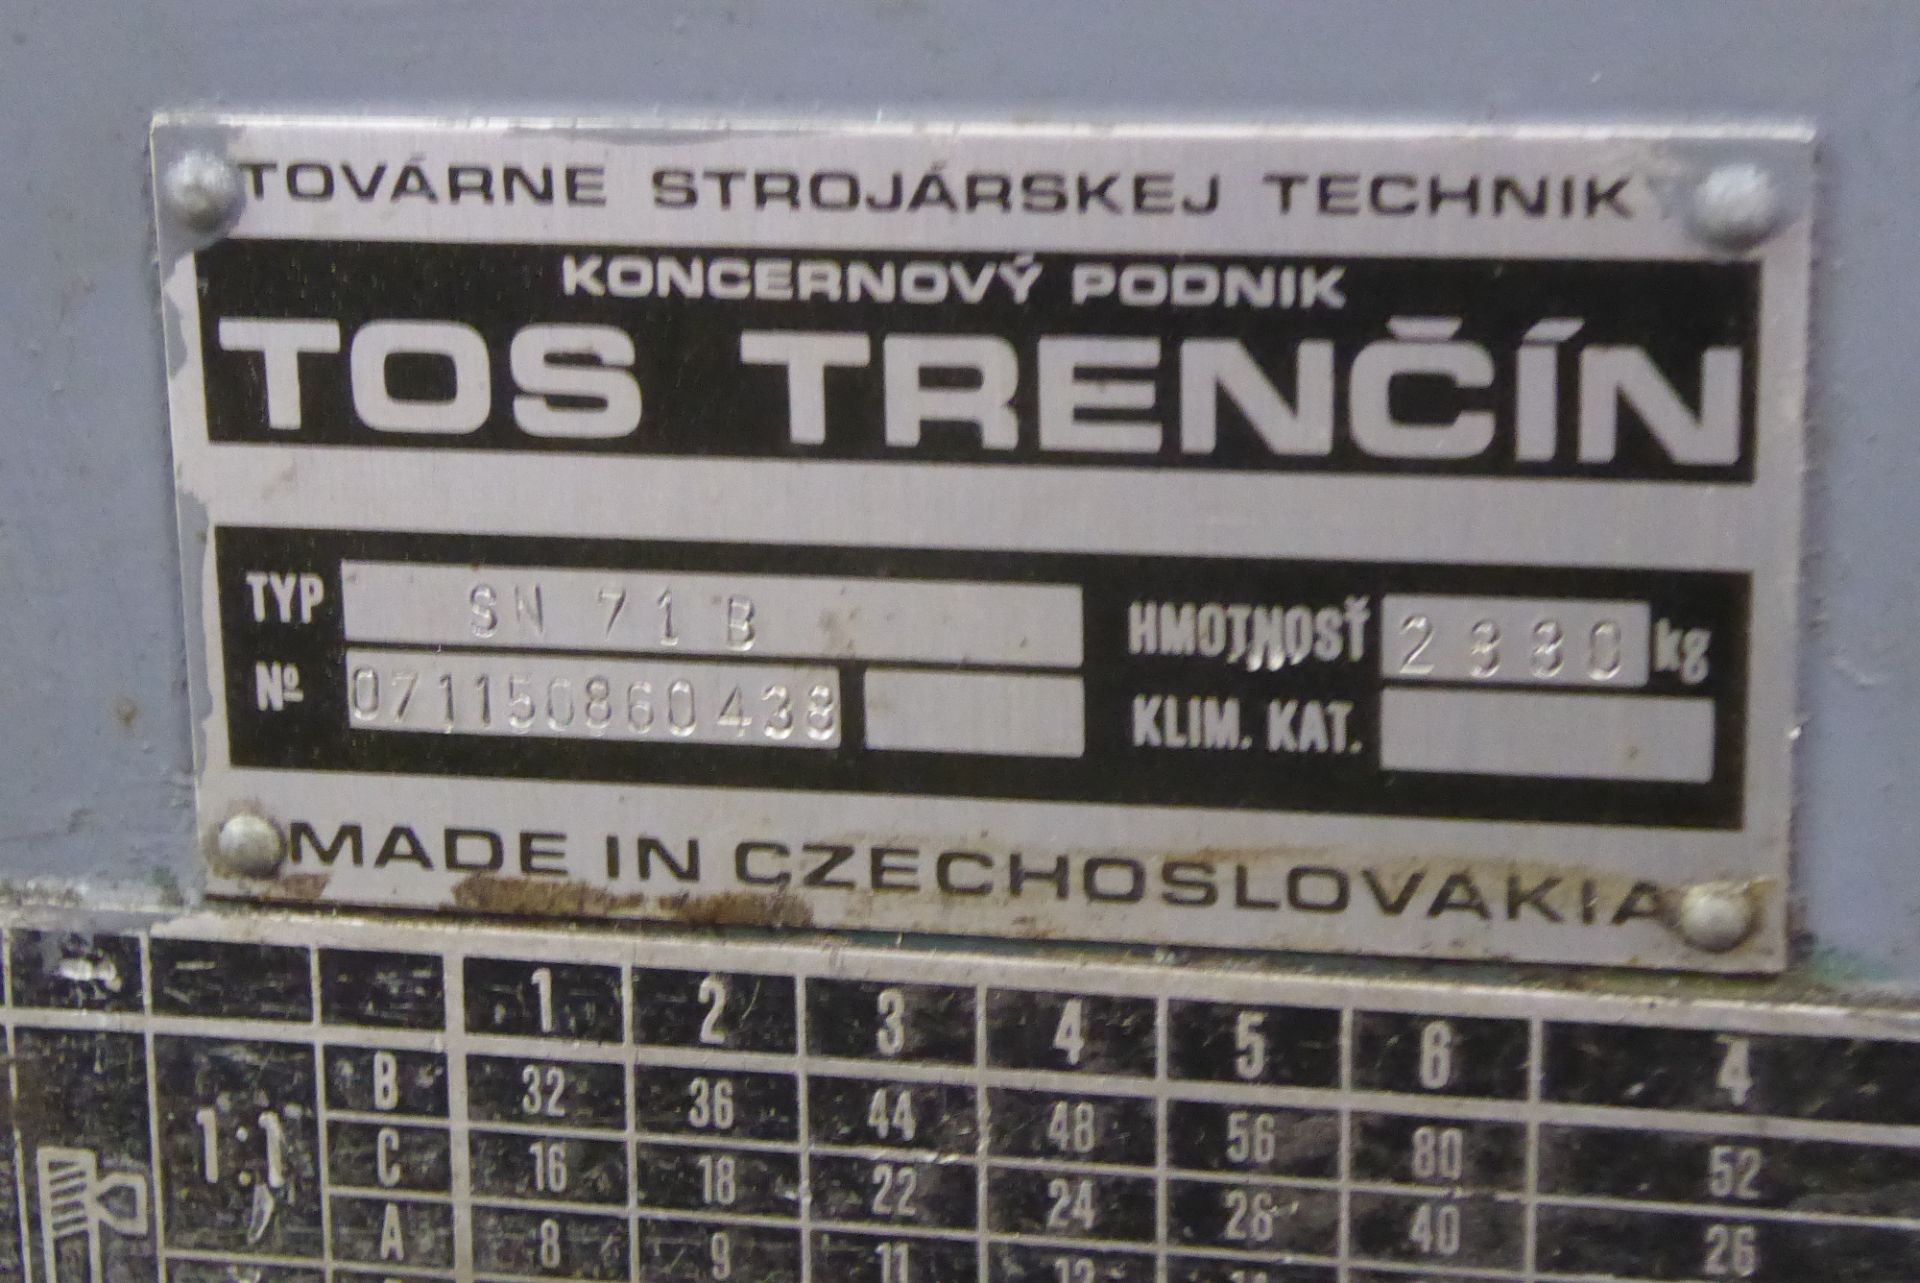 Tos Trencin Engine Lathe - Image 6 of 7